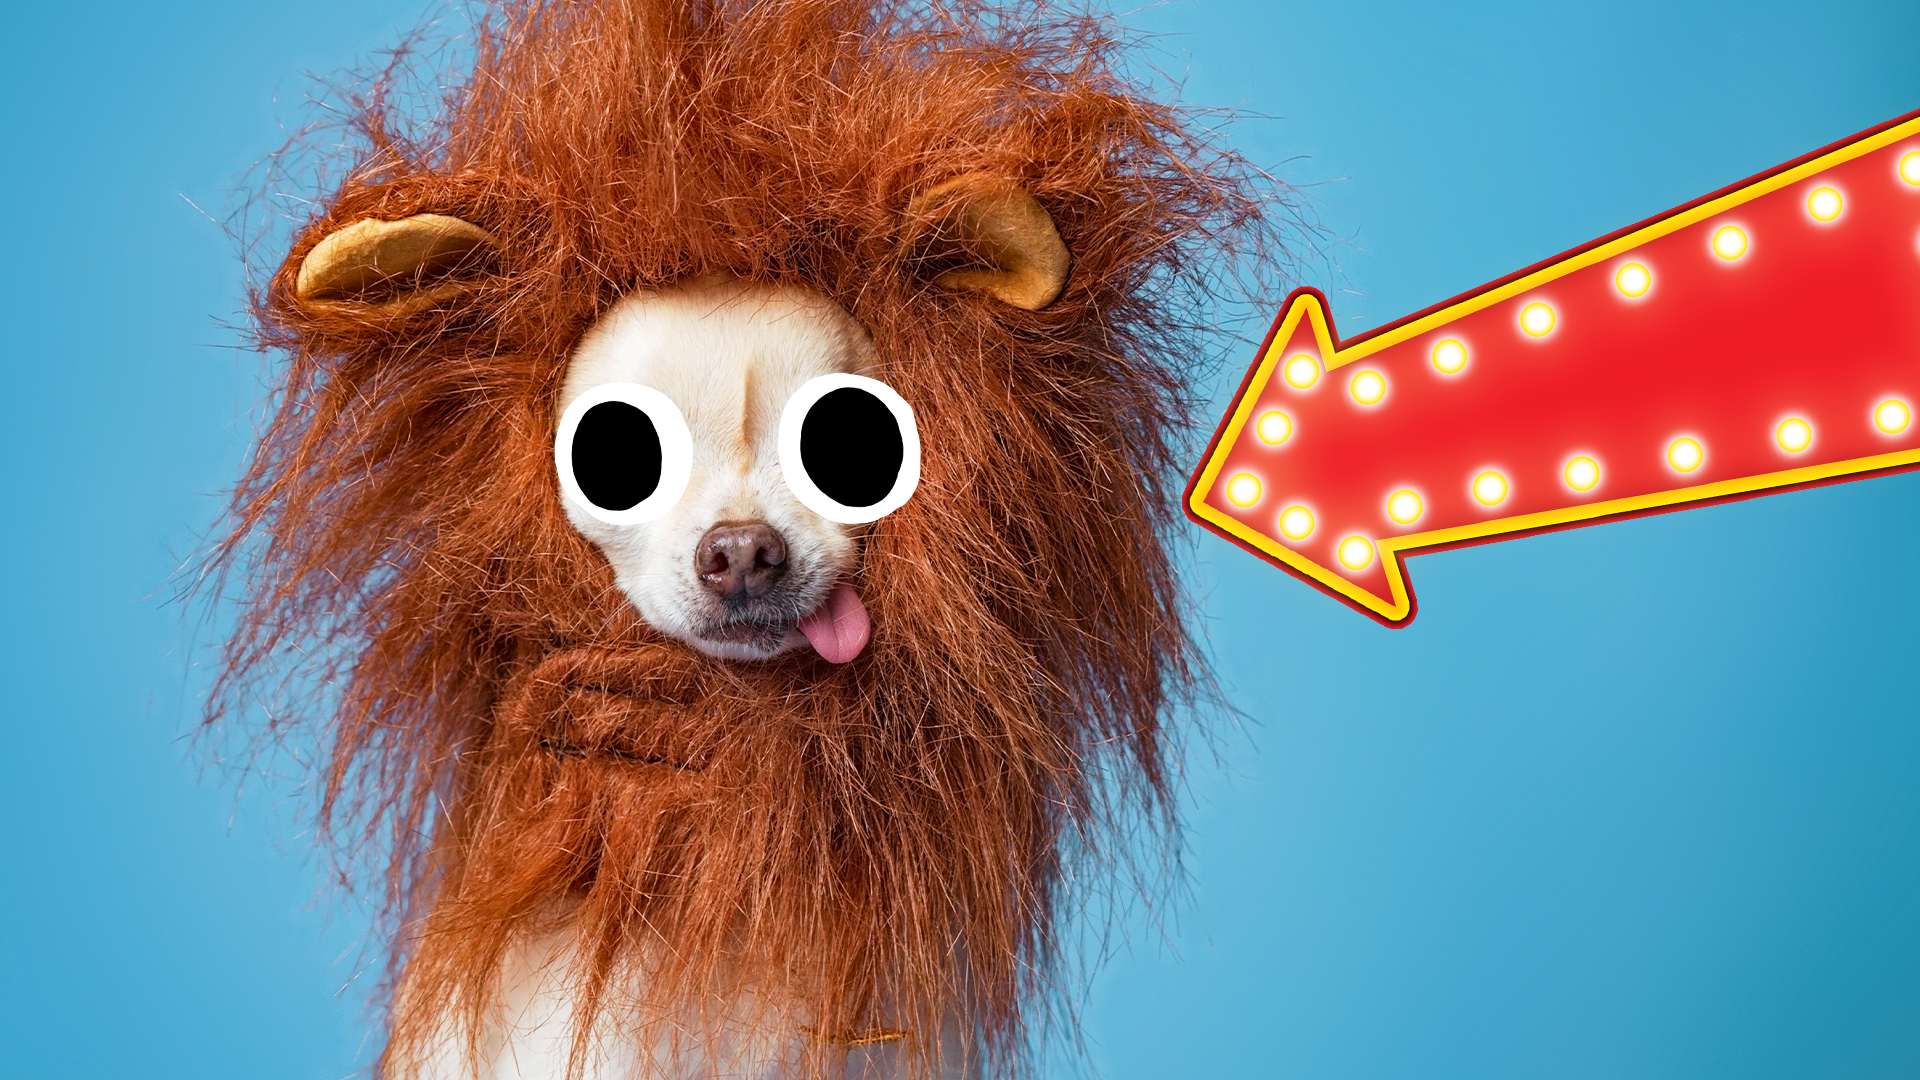 Dog dressed as lion on blue background with arrow